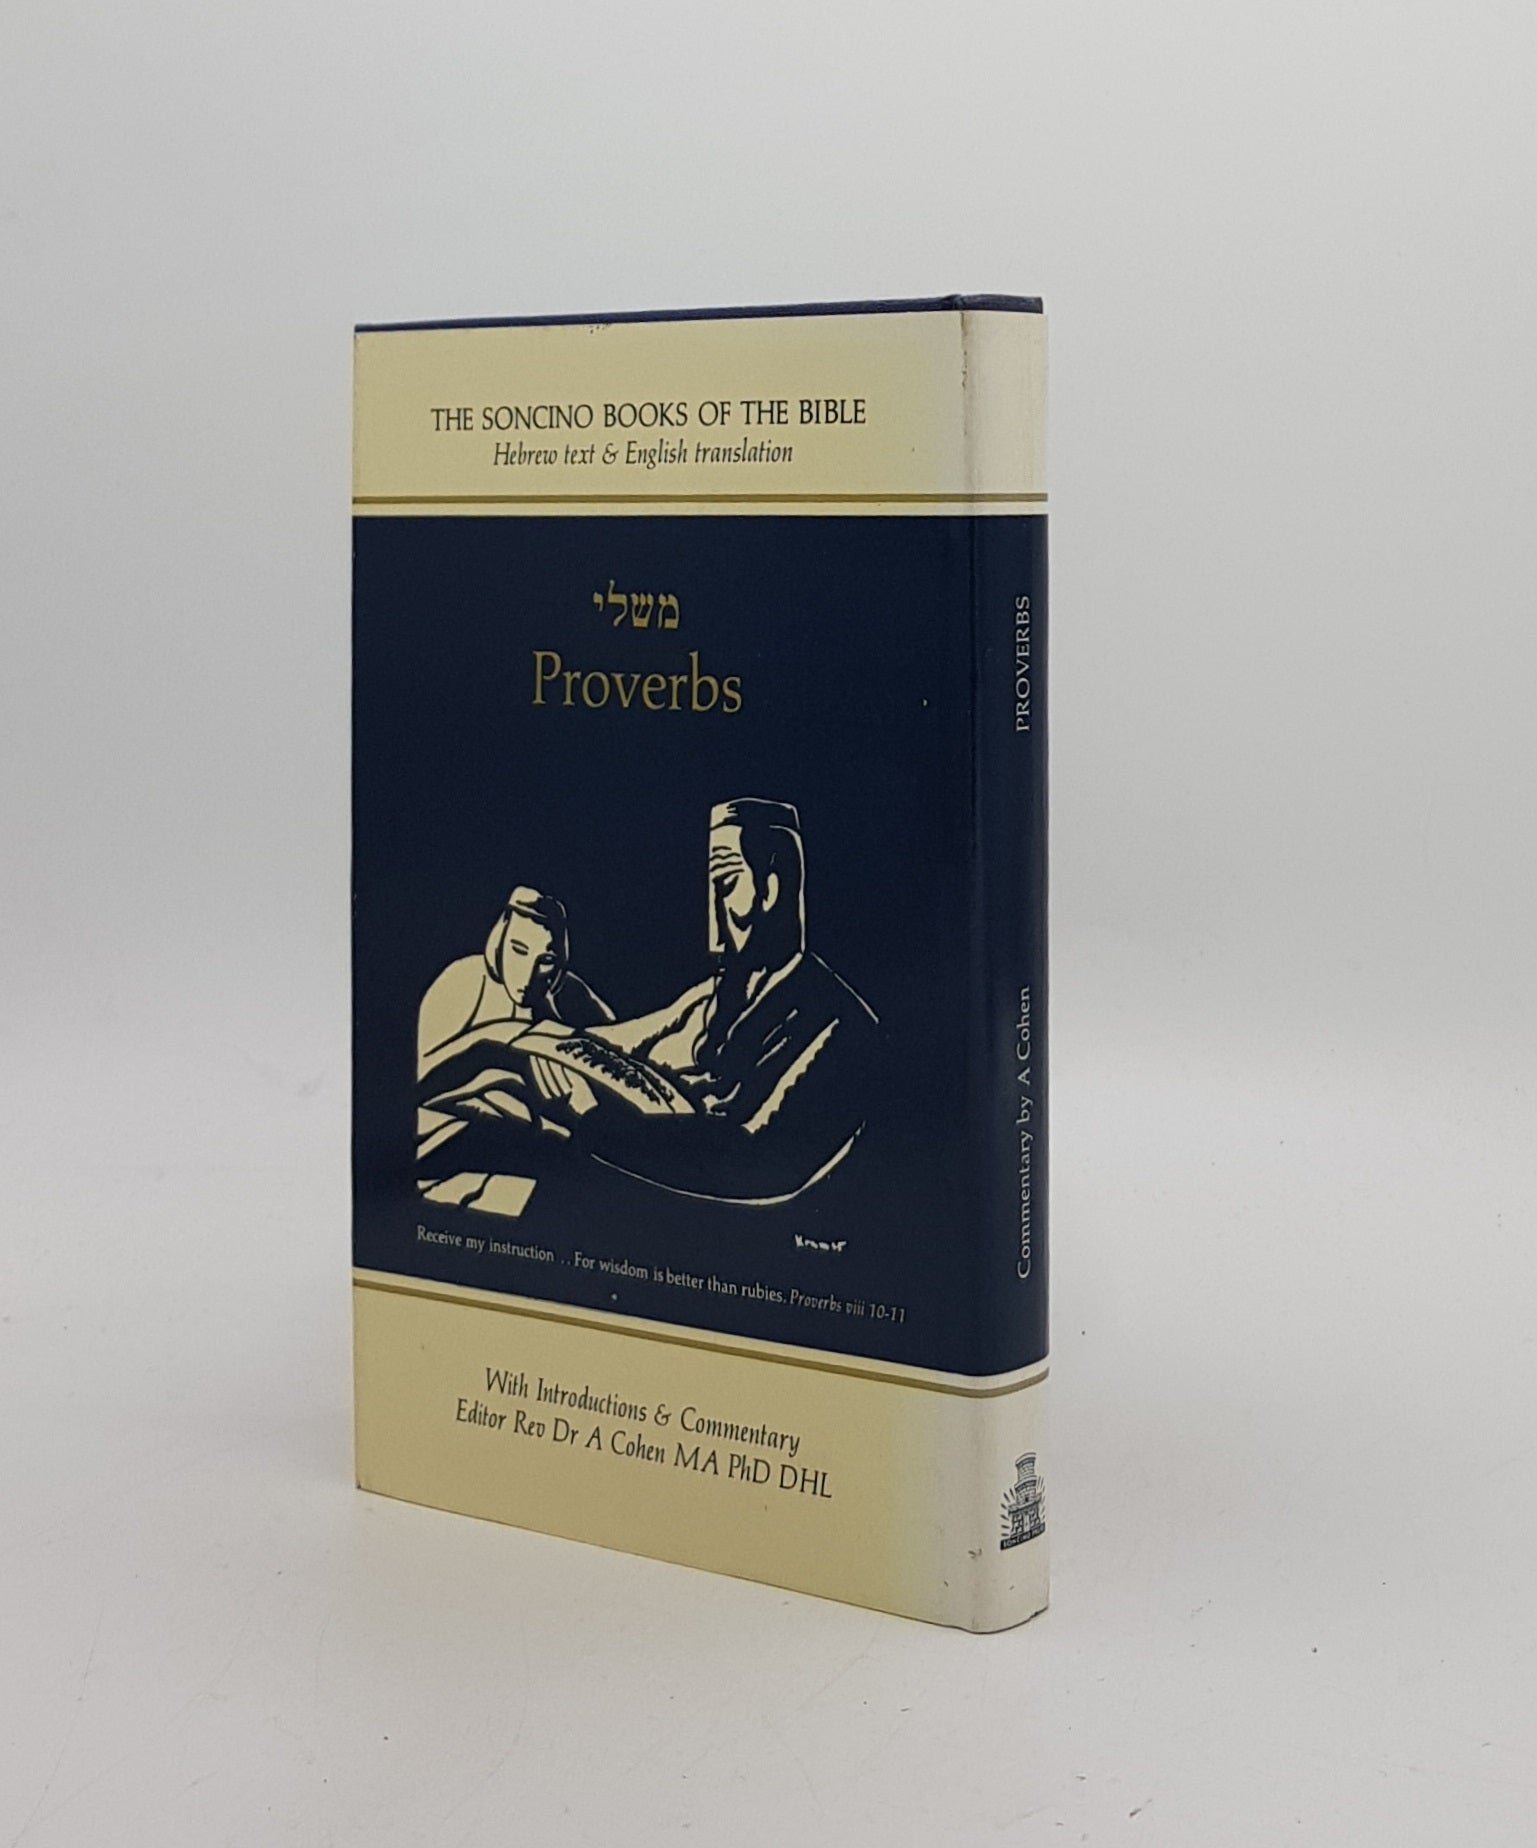 COHEN A., ROSENBERG A.J. - Proverbs the Soncino Books of the Bible